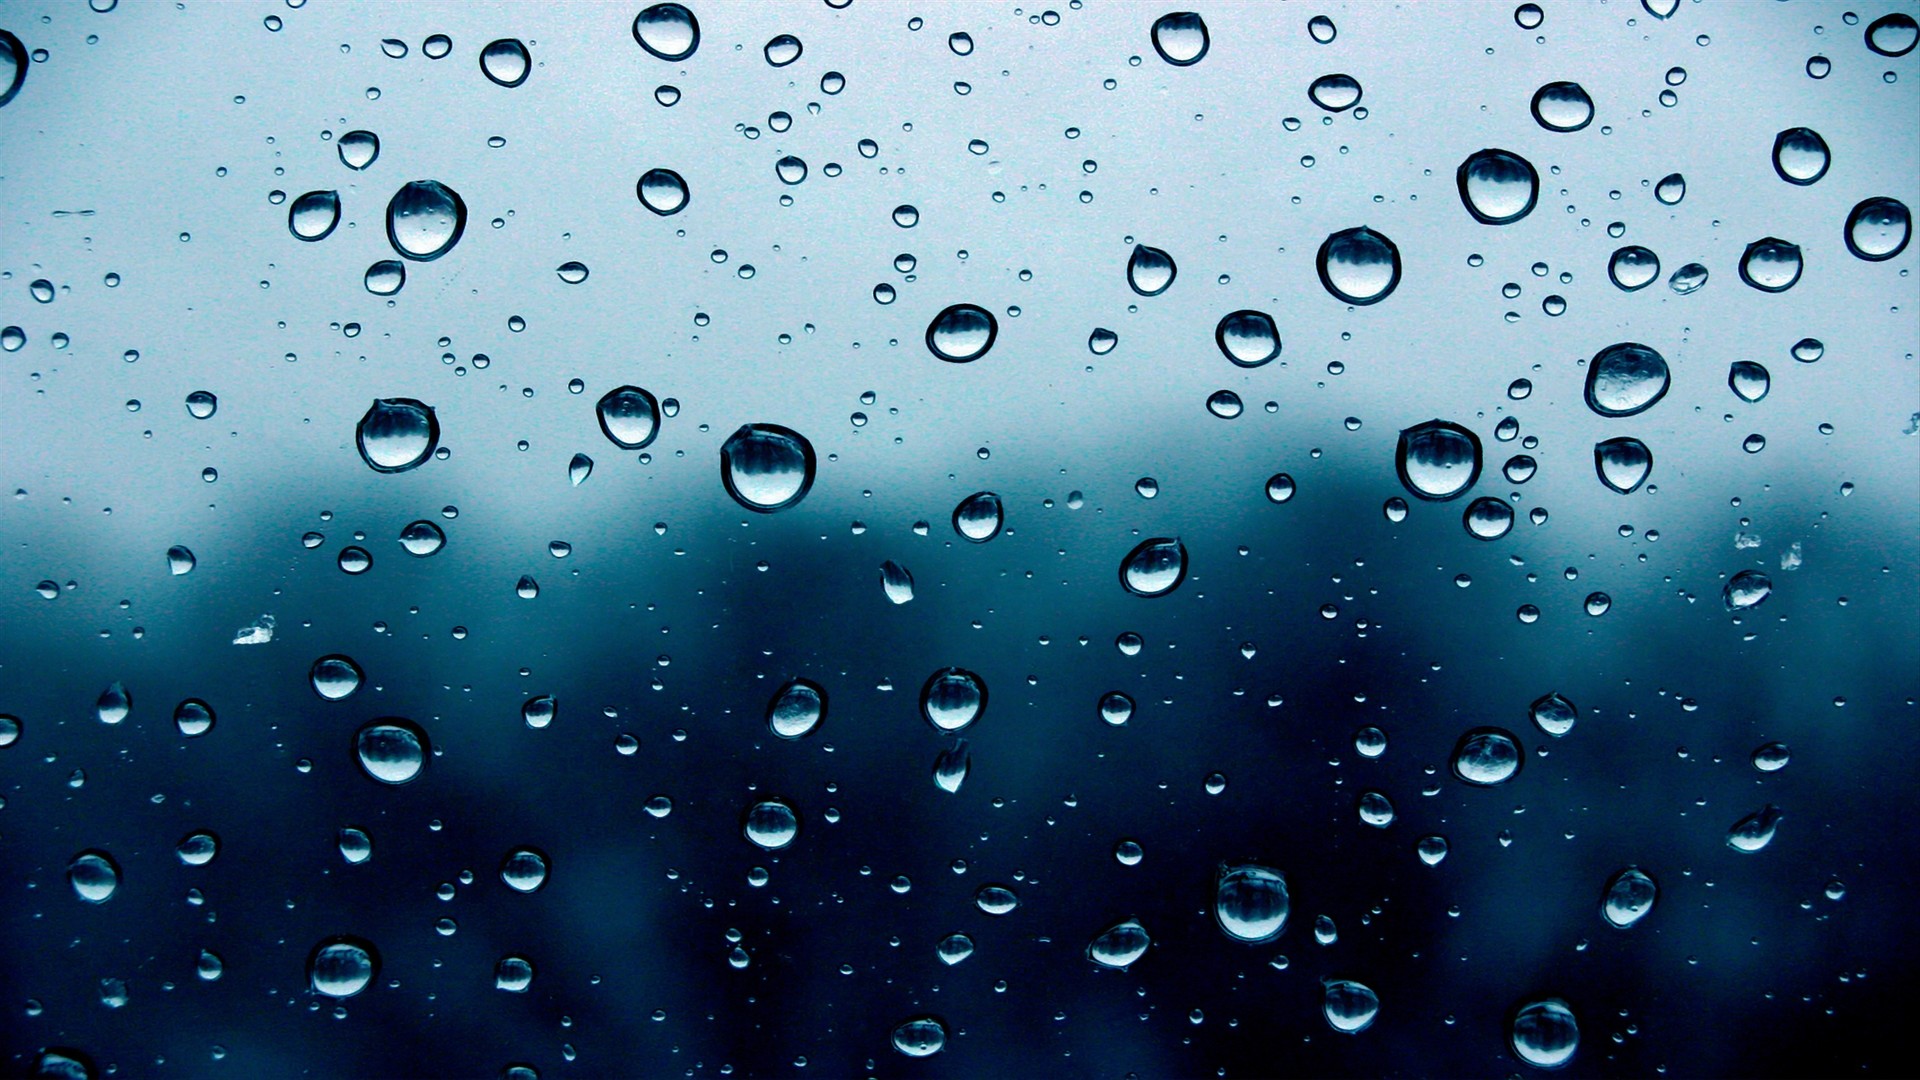 1920x1080 HQ RES Wallpapers of Rain